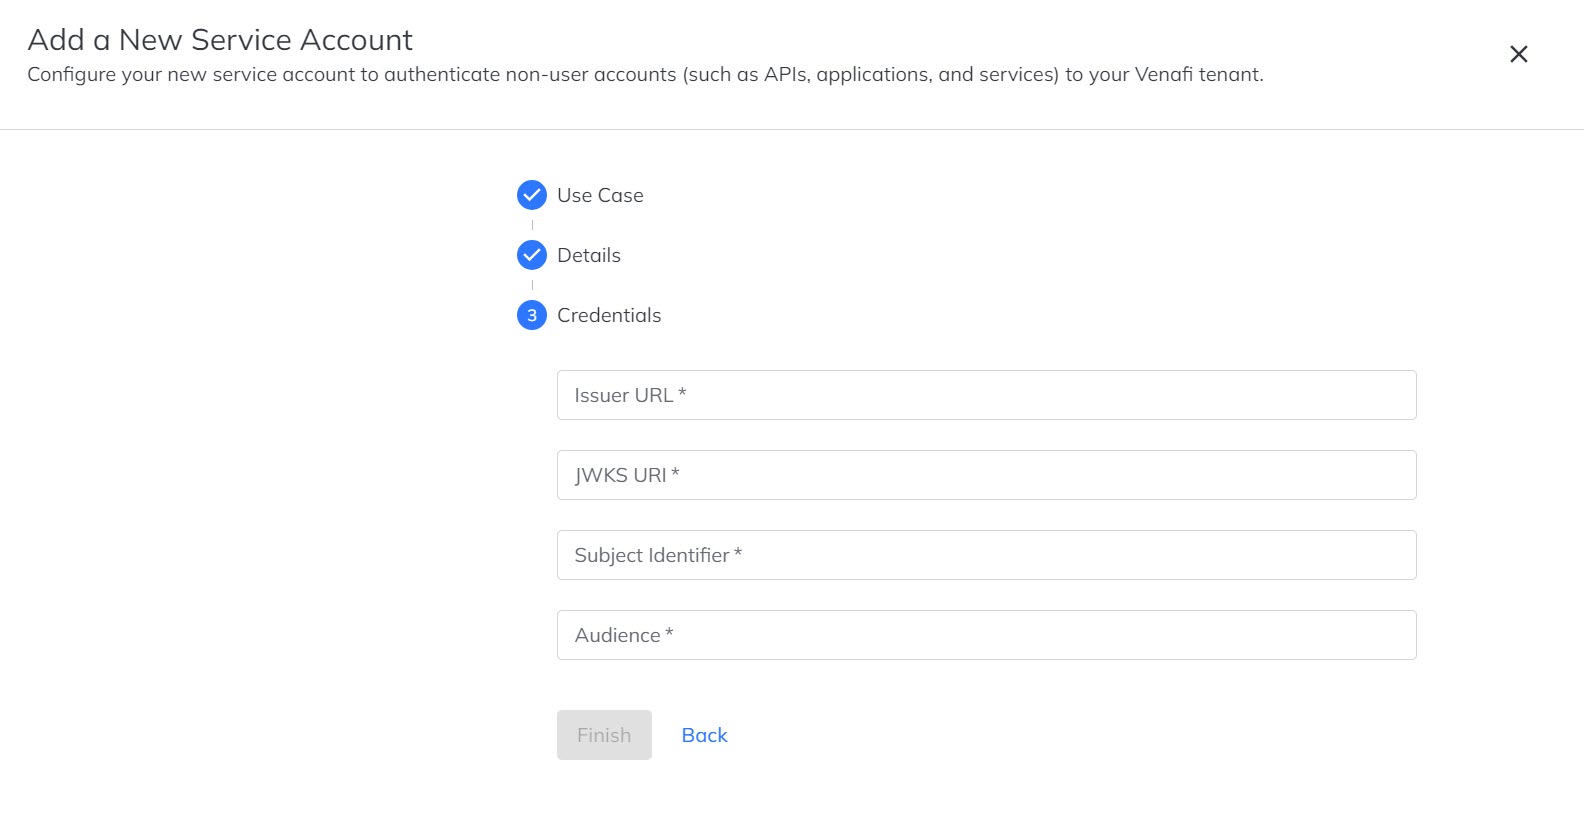 New service account type supporing workload identity federation